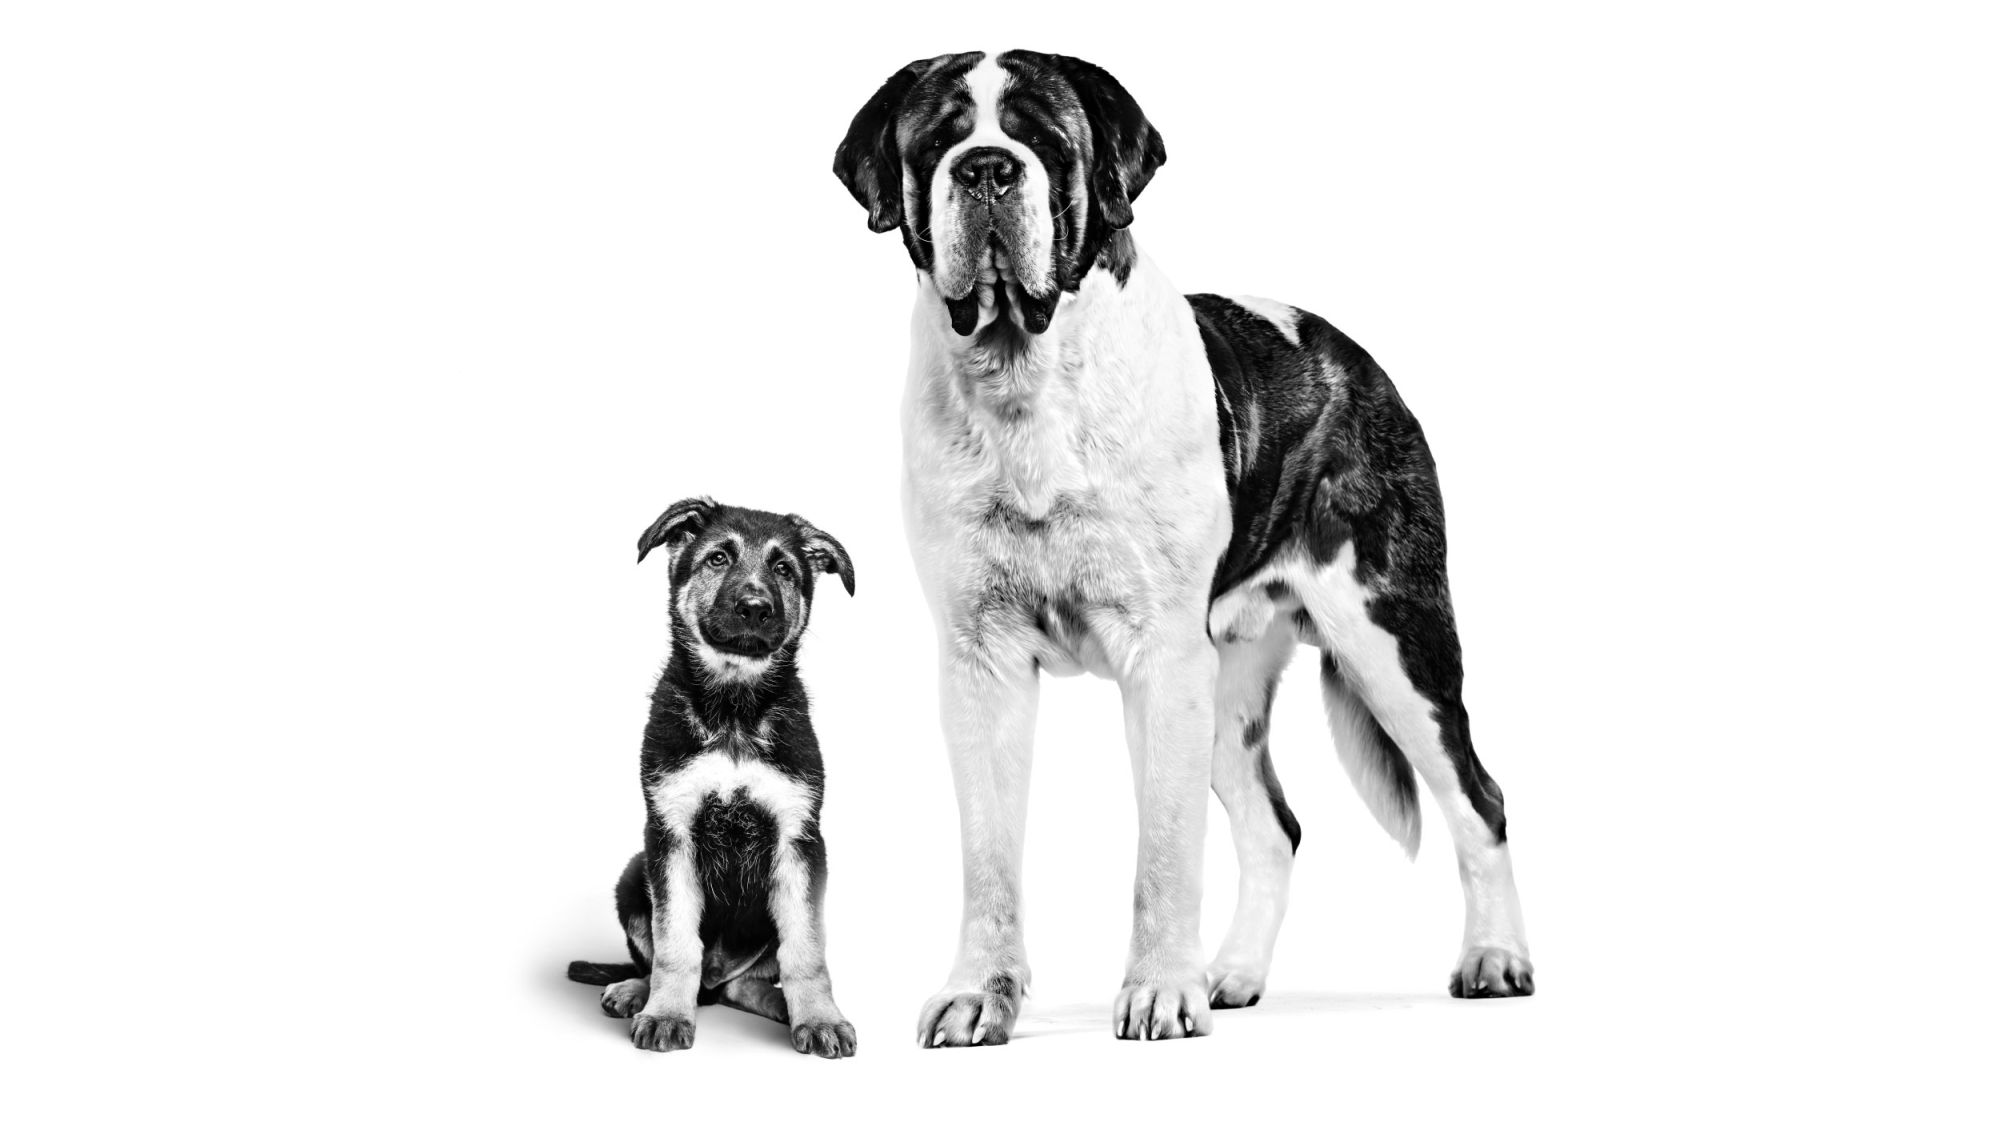 Black and white puppy and dog standing